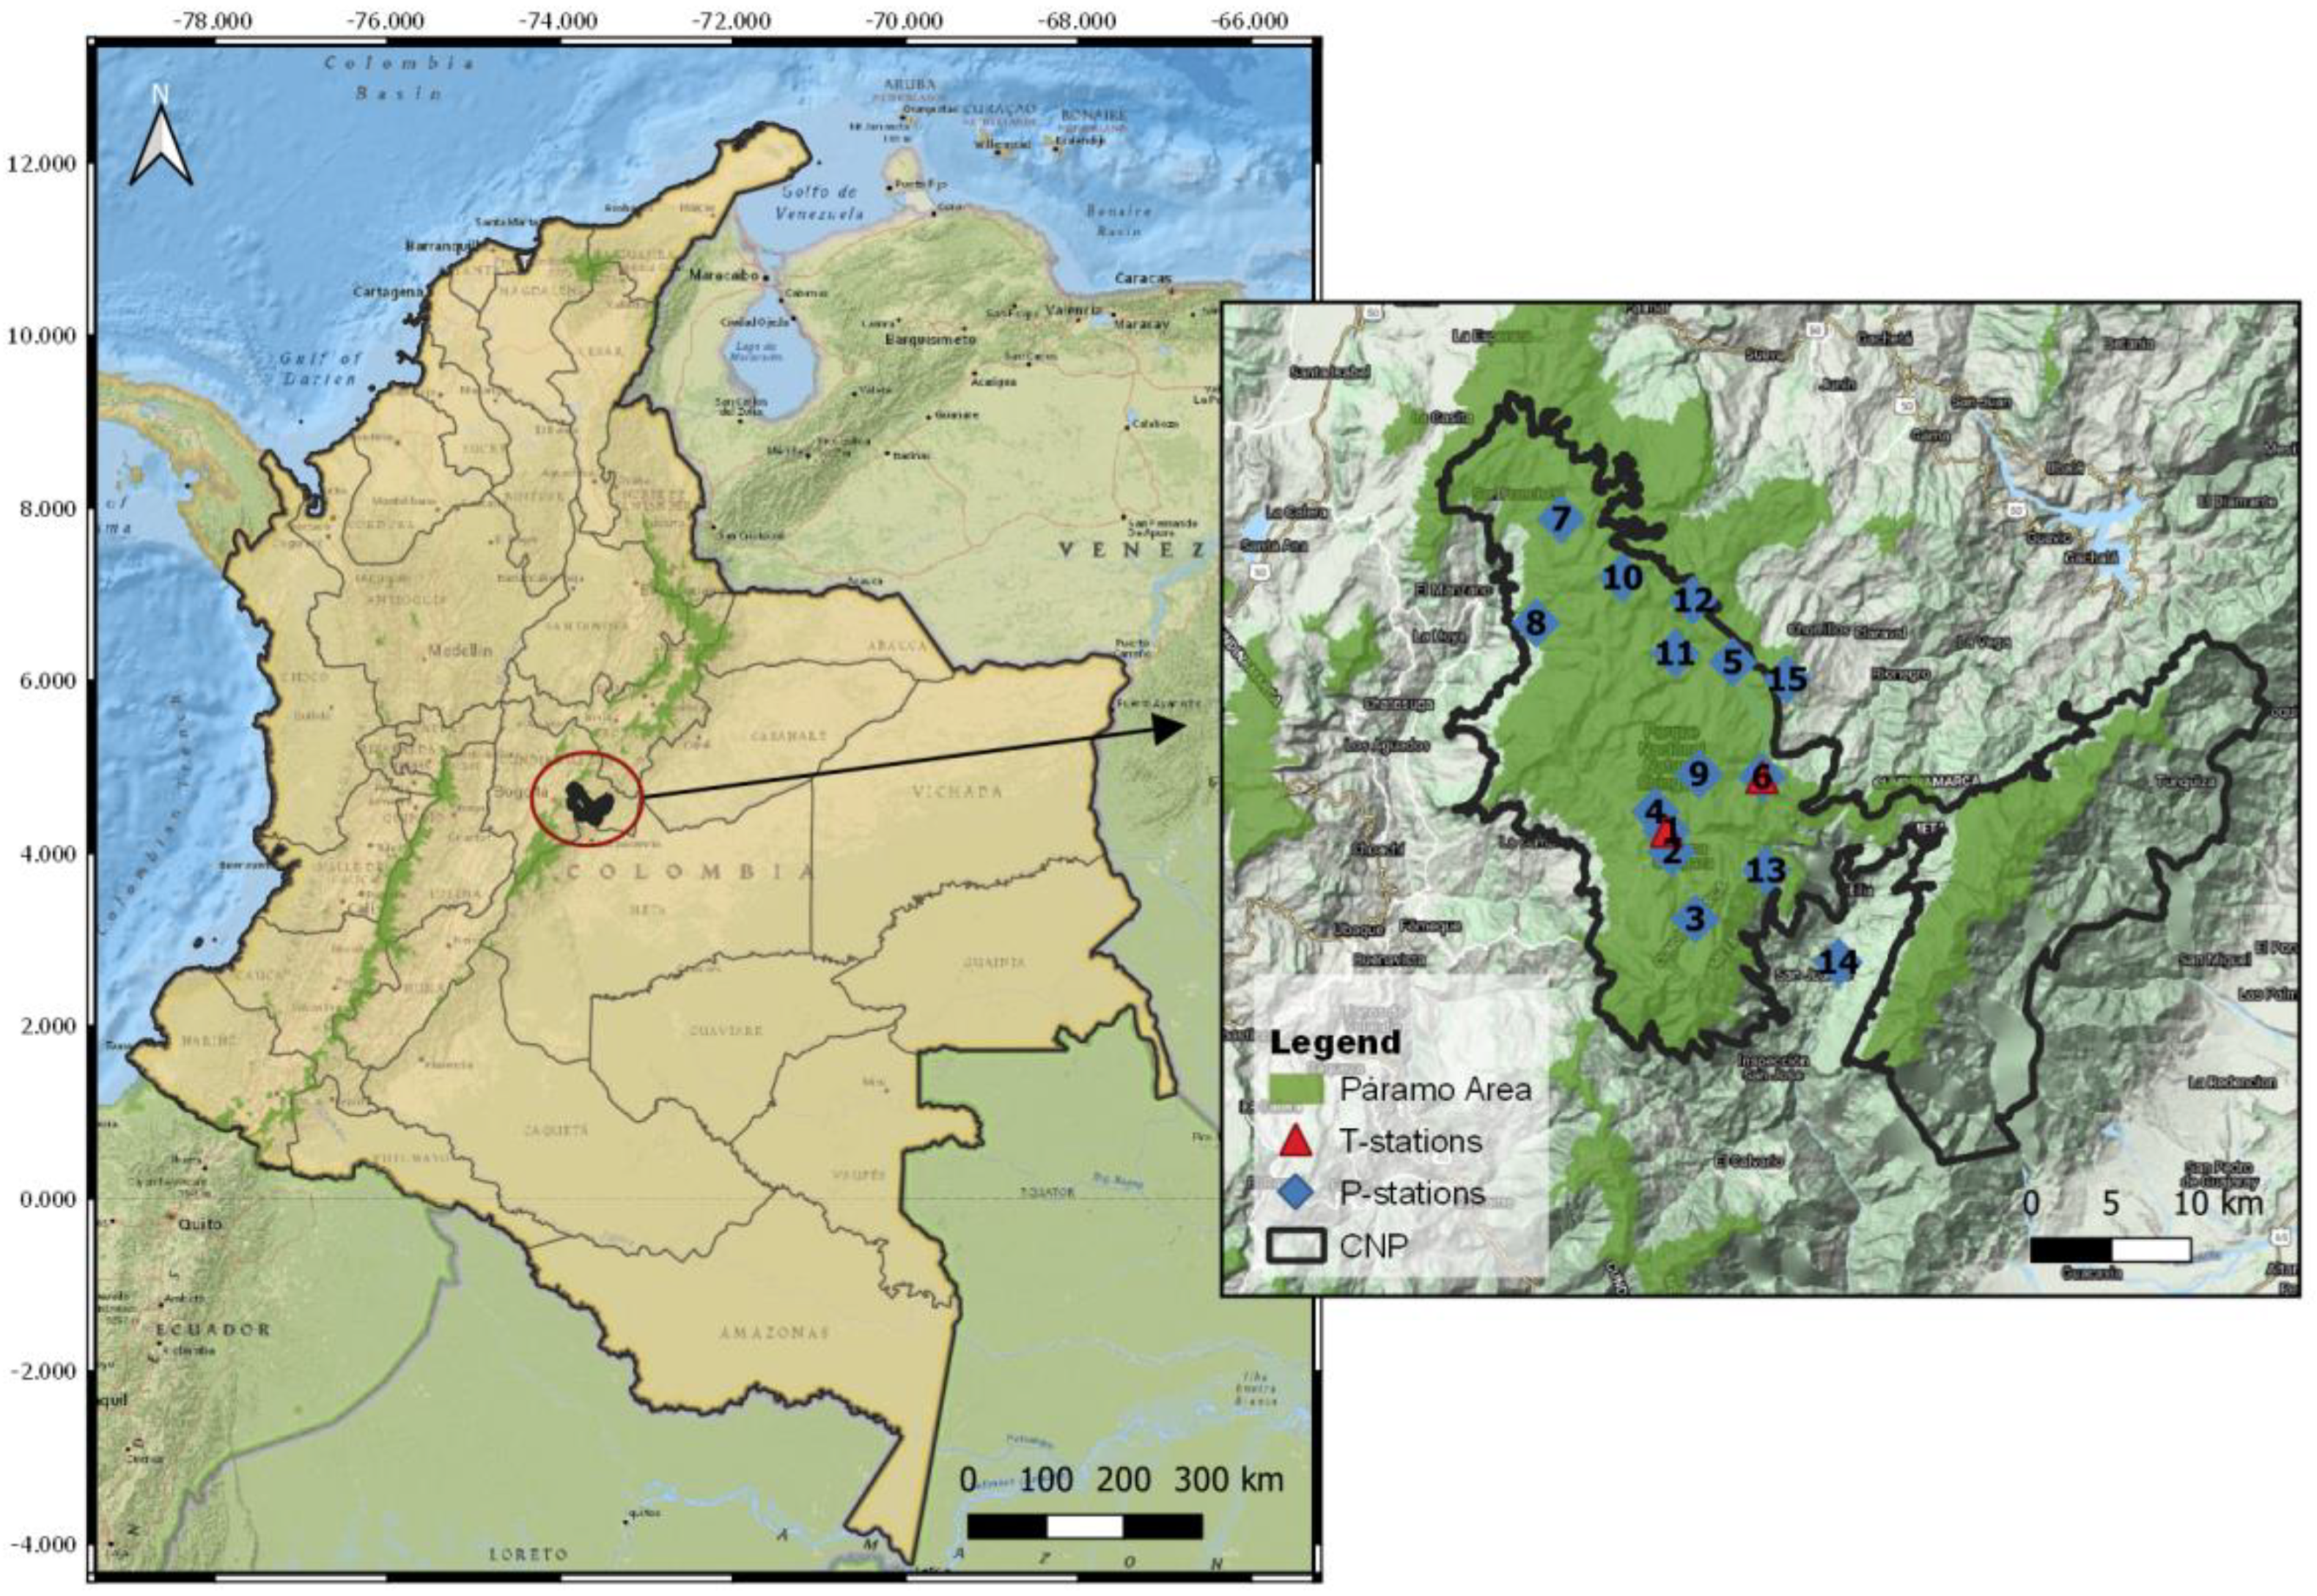 Sustainability | Free Full-Text | Future Climate Change Renders Unsuitable  Conditions for Paramo Ecosystems in Colombia